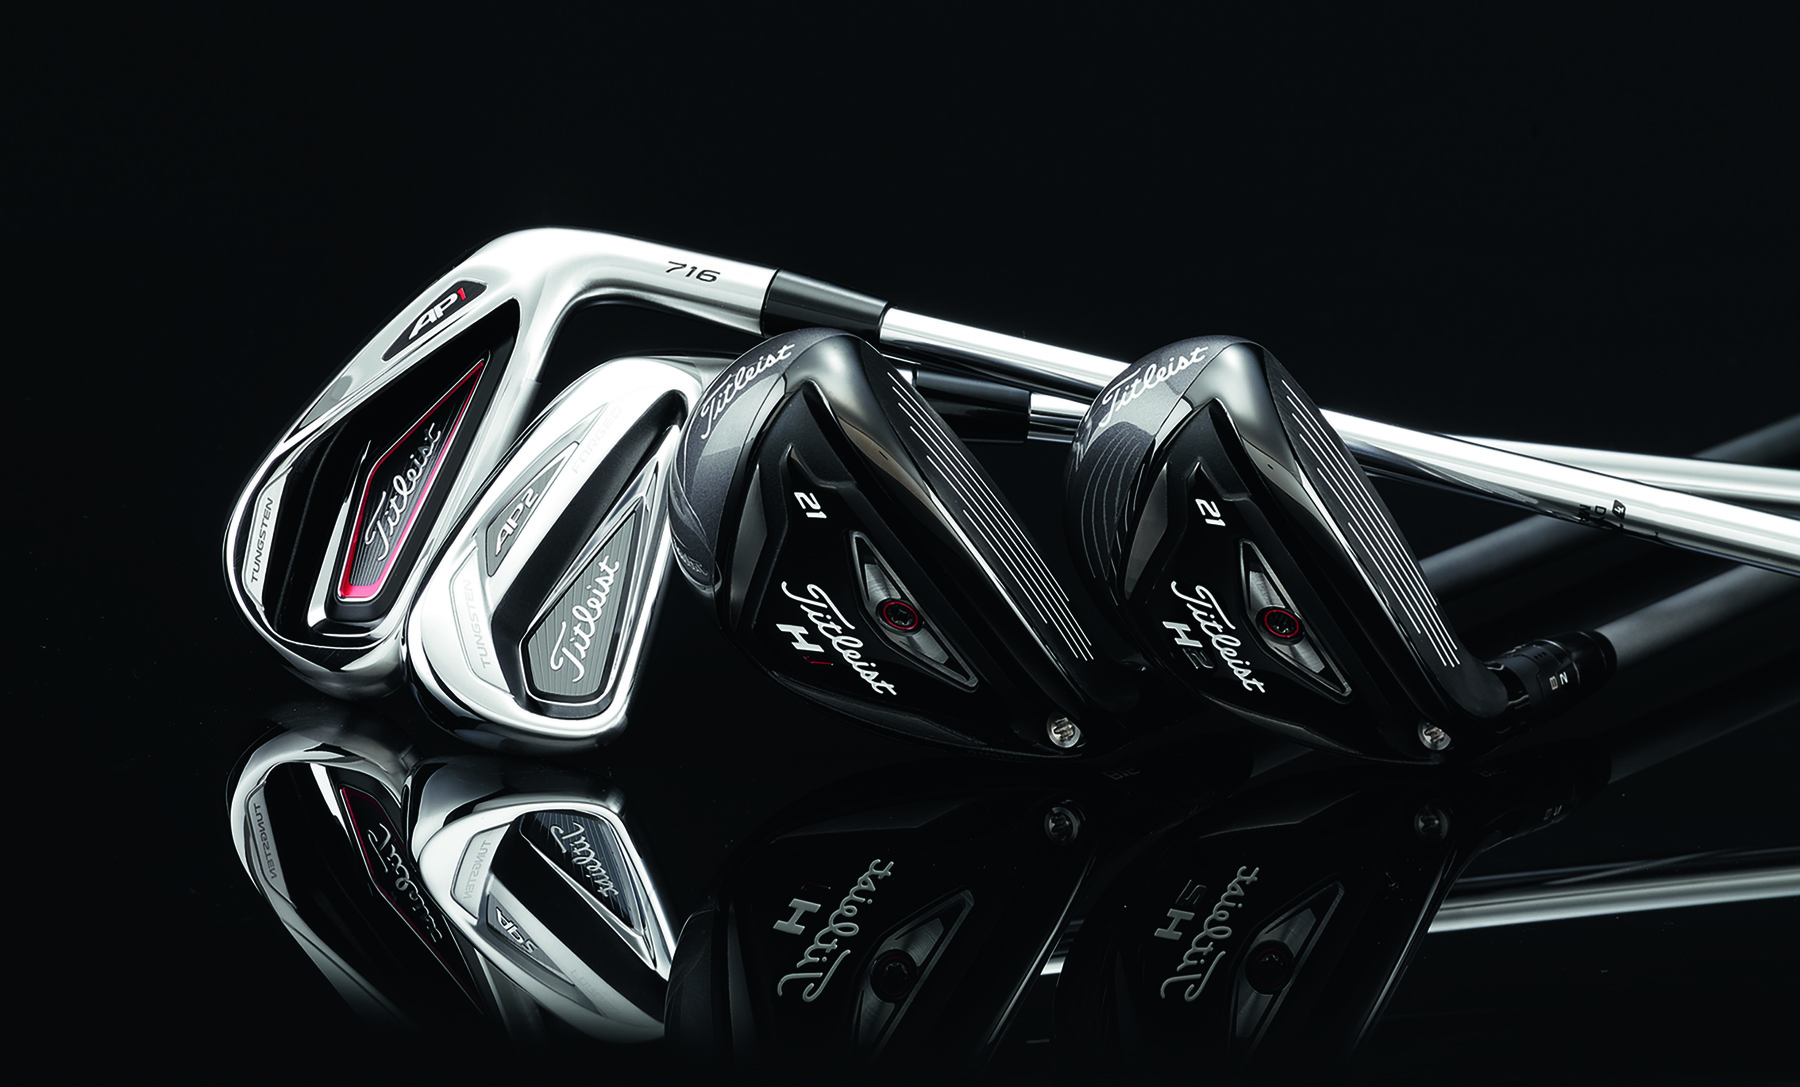 The new Titleist 716 AP1 & AP2 irons and 816 hybrids